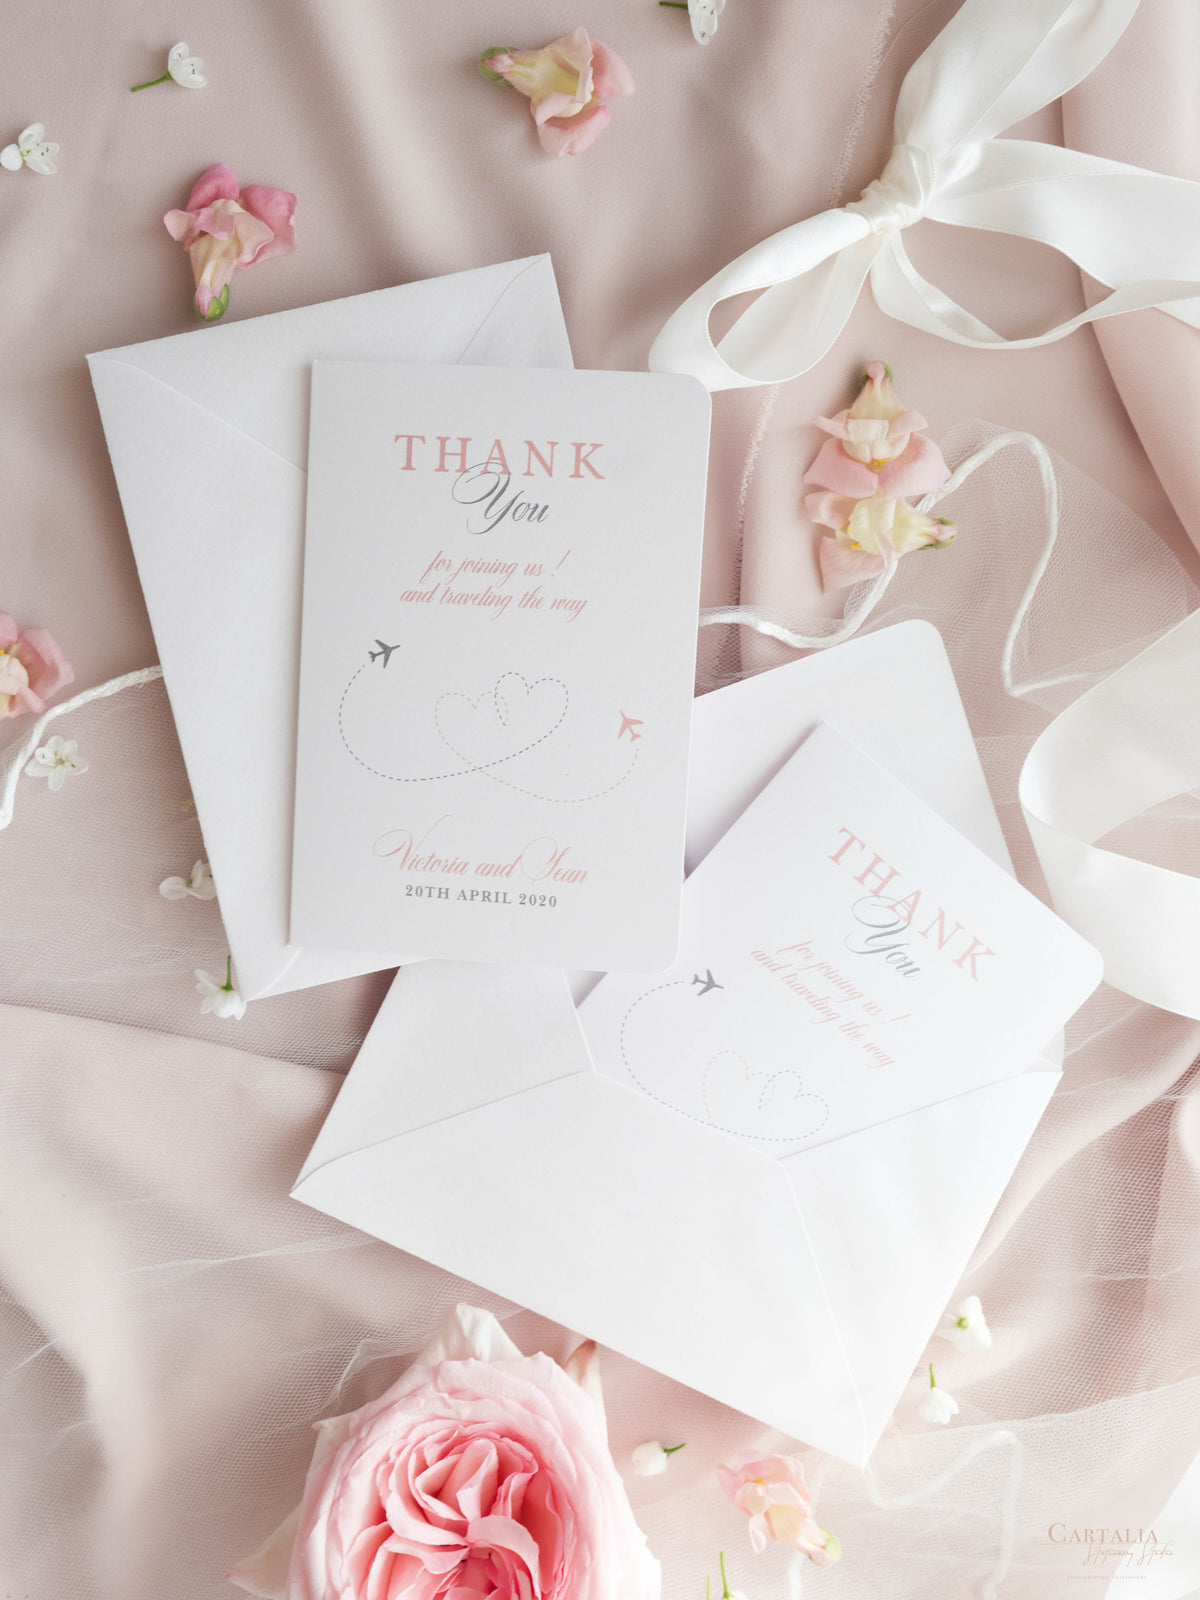 Thank you Cards with own message - matching Passport Wedding Invitation